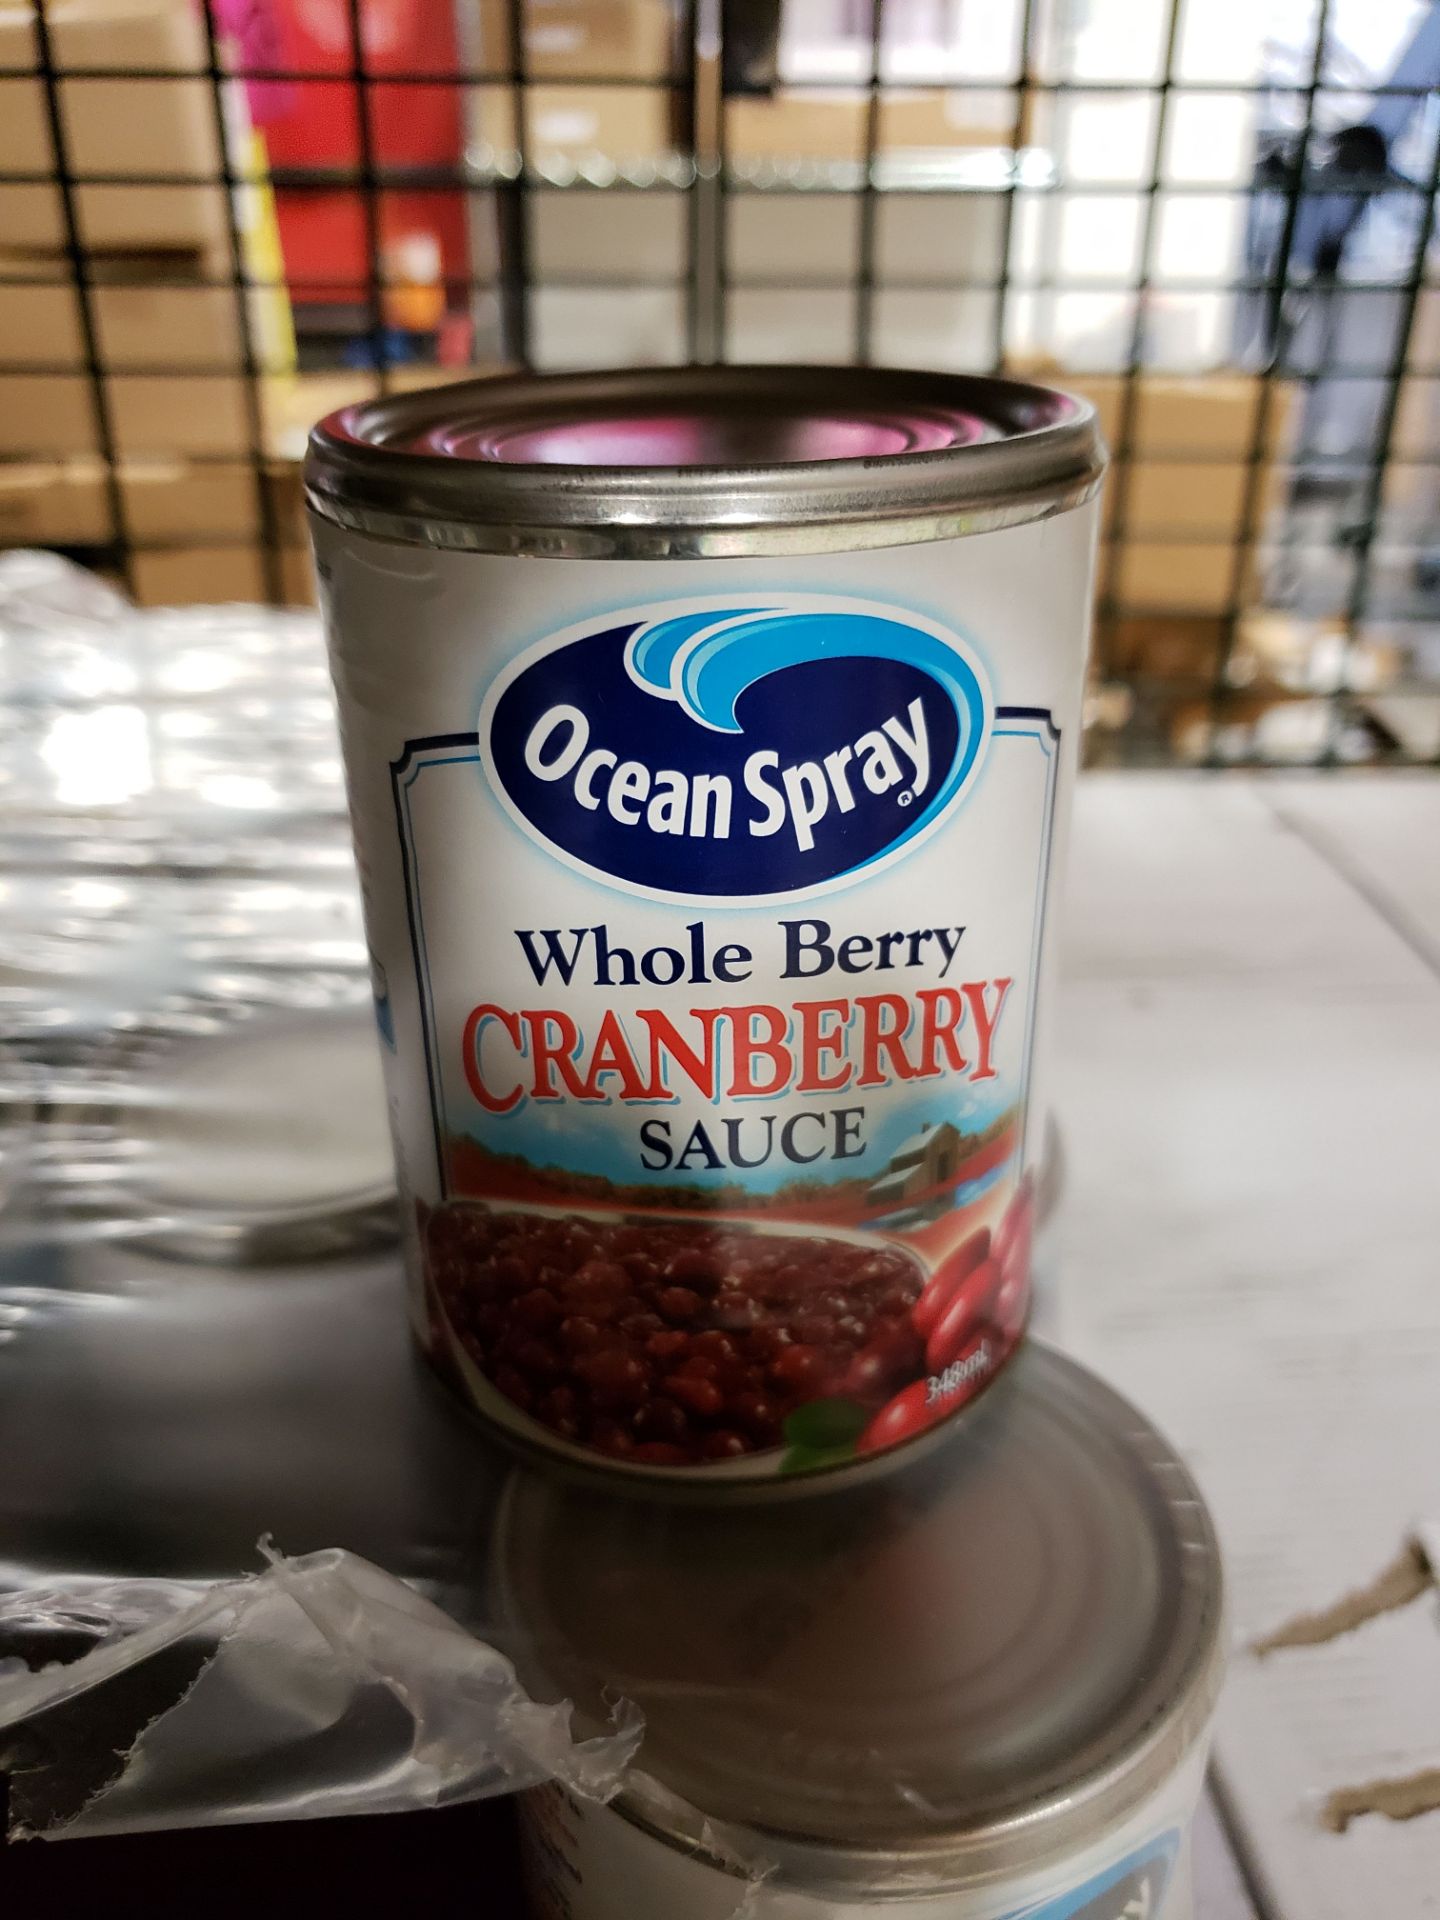 Ocean Spray Whole Berry Cranberry Sauce - 22 x 340ml Cans - Image 2 of 2